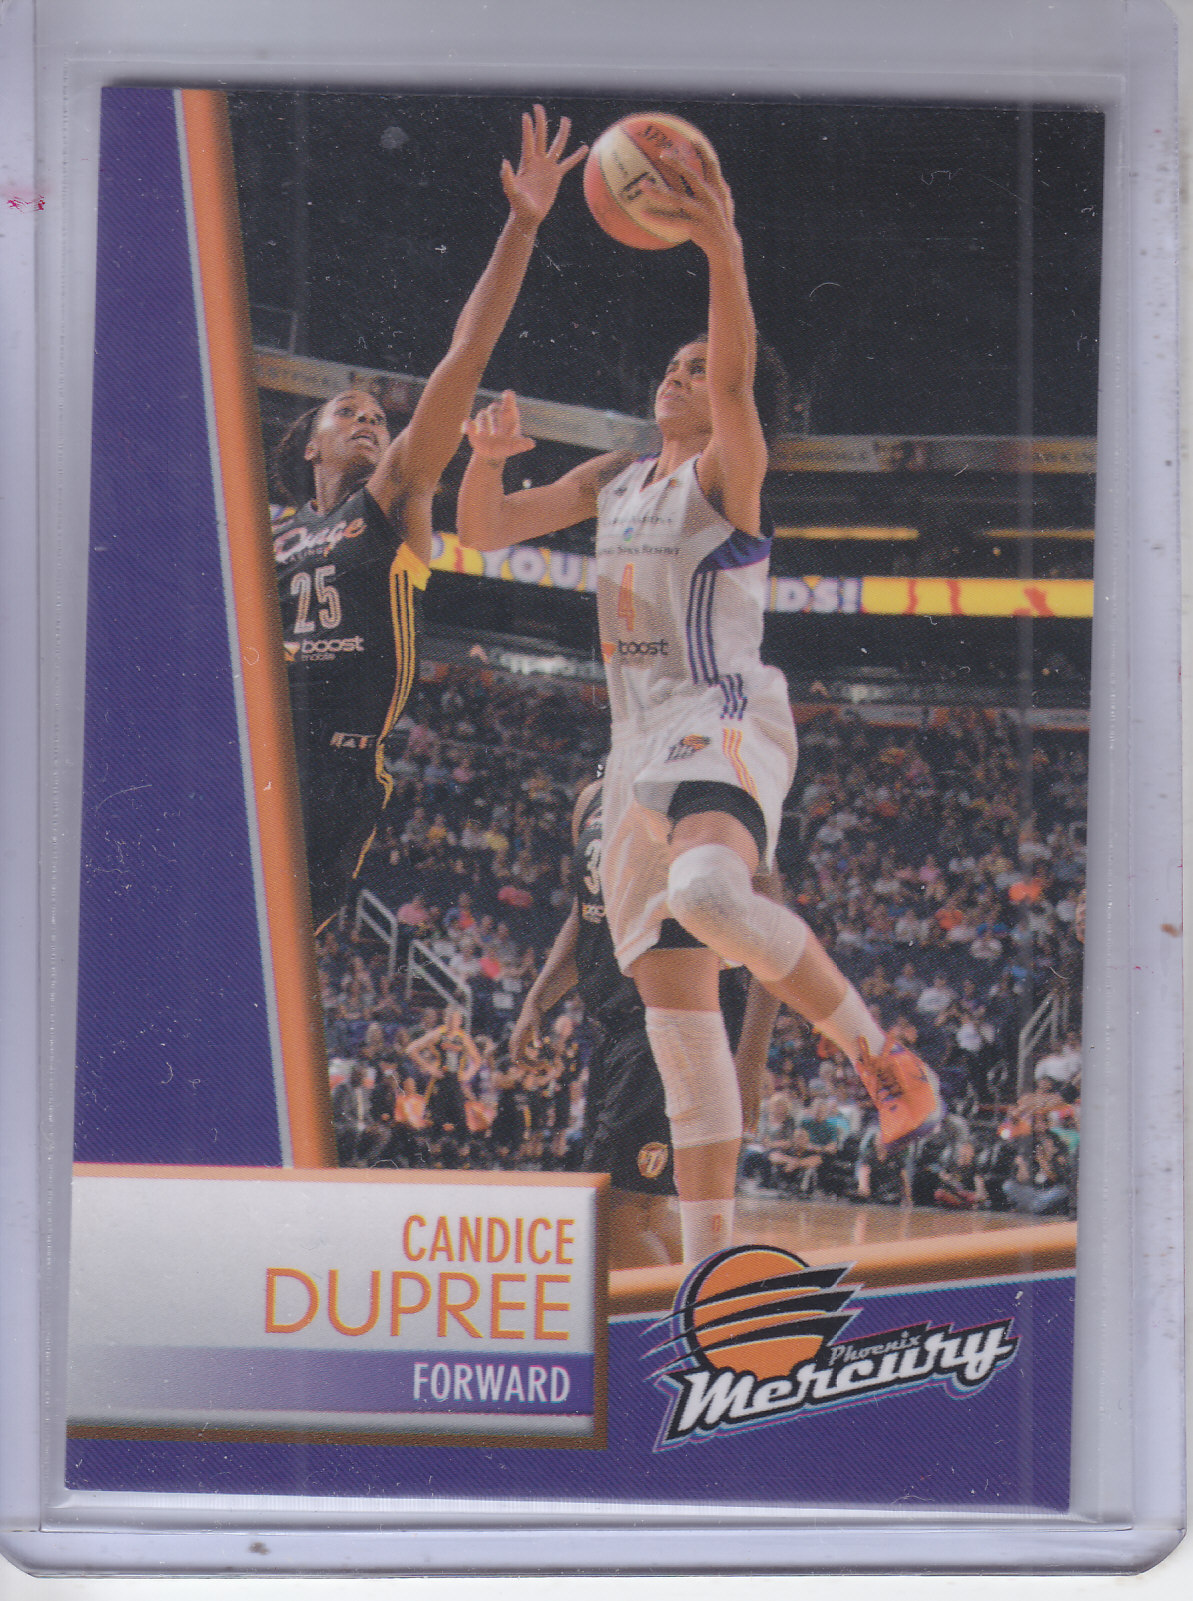  Candice Dupree player image